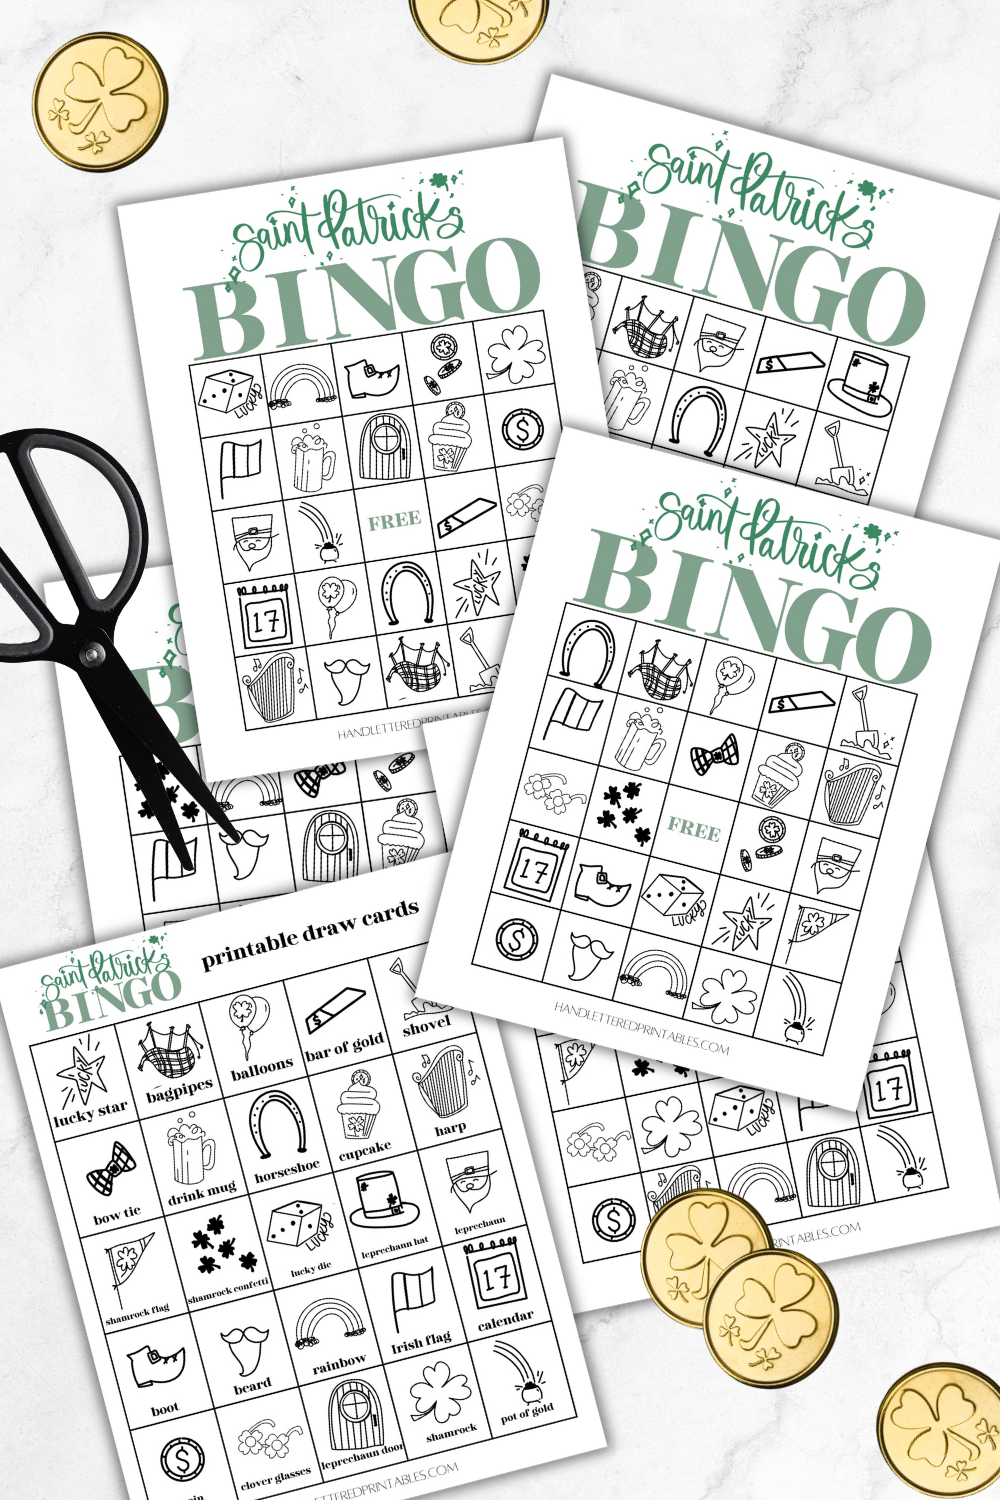 image of three printed saint patrick's day bingo cards with 1 printed saint patricks day bingo calling cards ready to be cut out on marble counter styled with black scissors and plastic gold coins